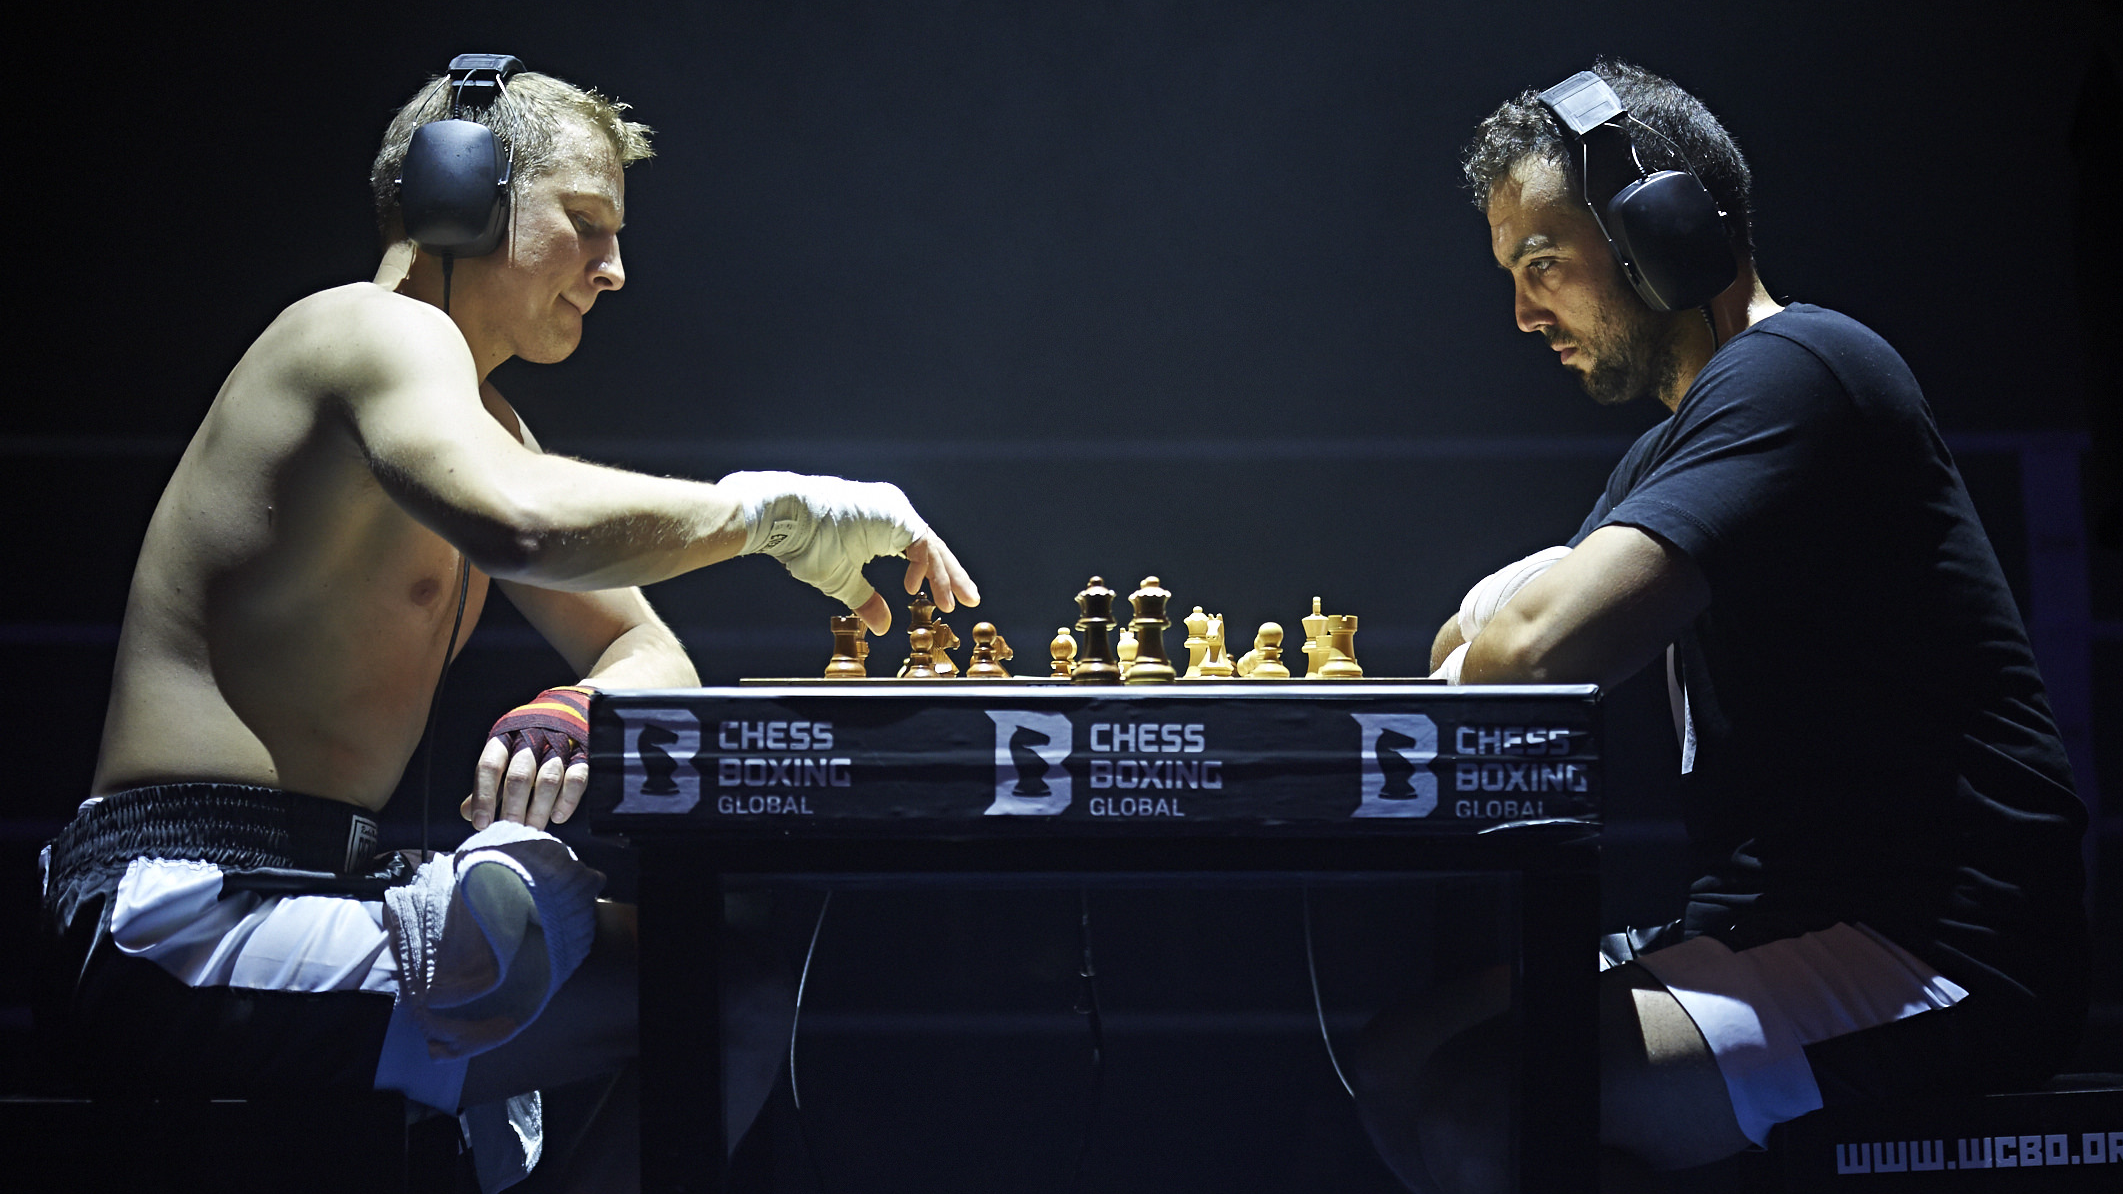 Chess Boxing - The Combination Makes the Difference